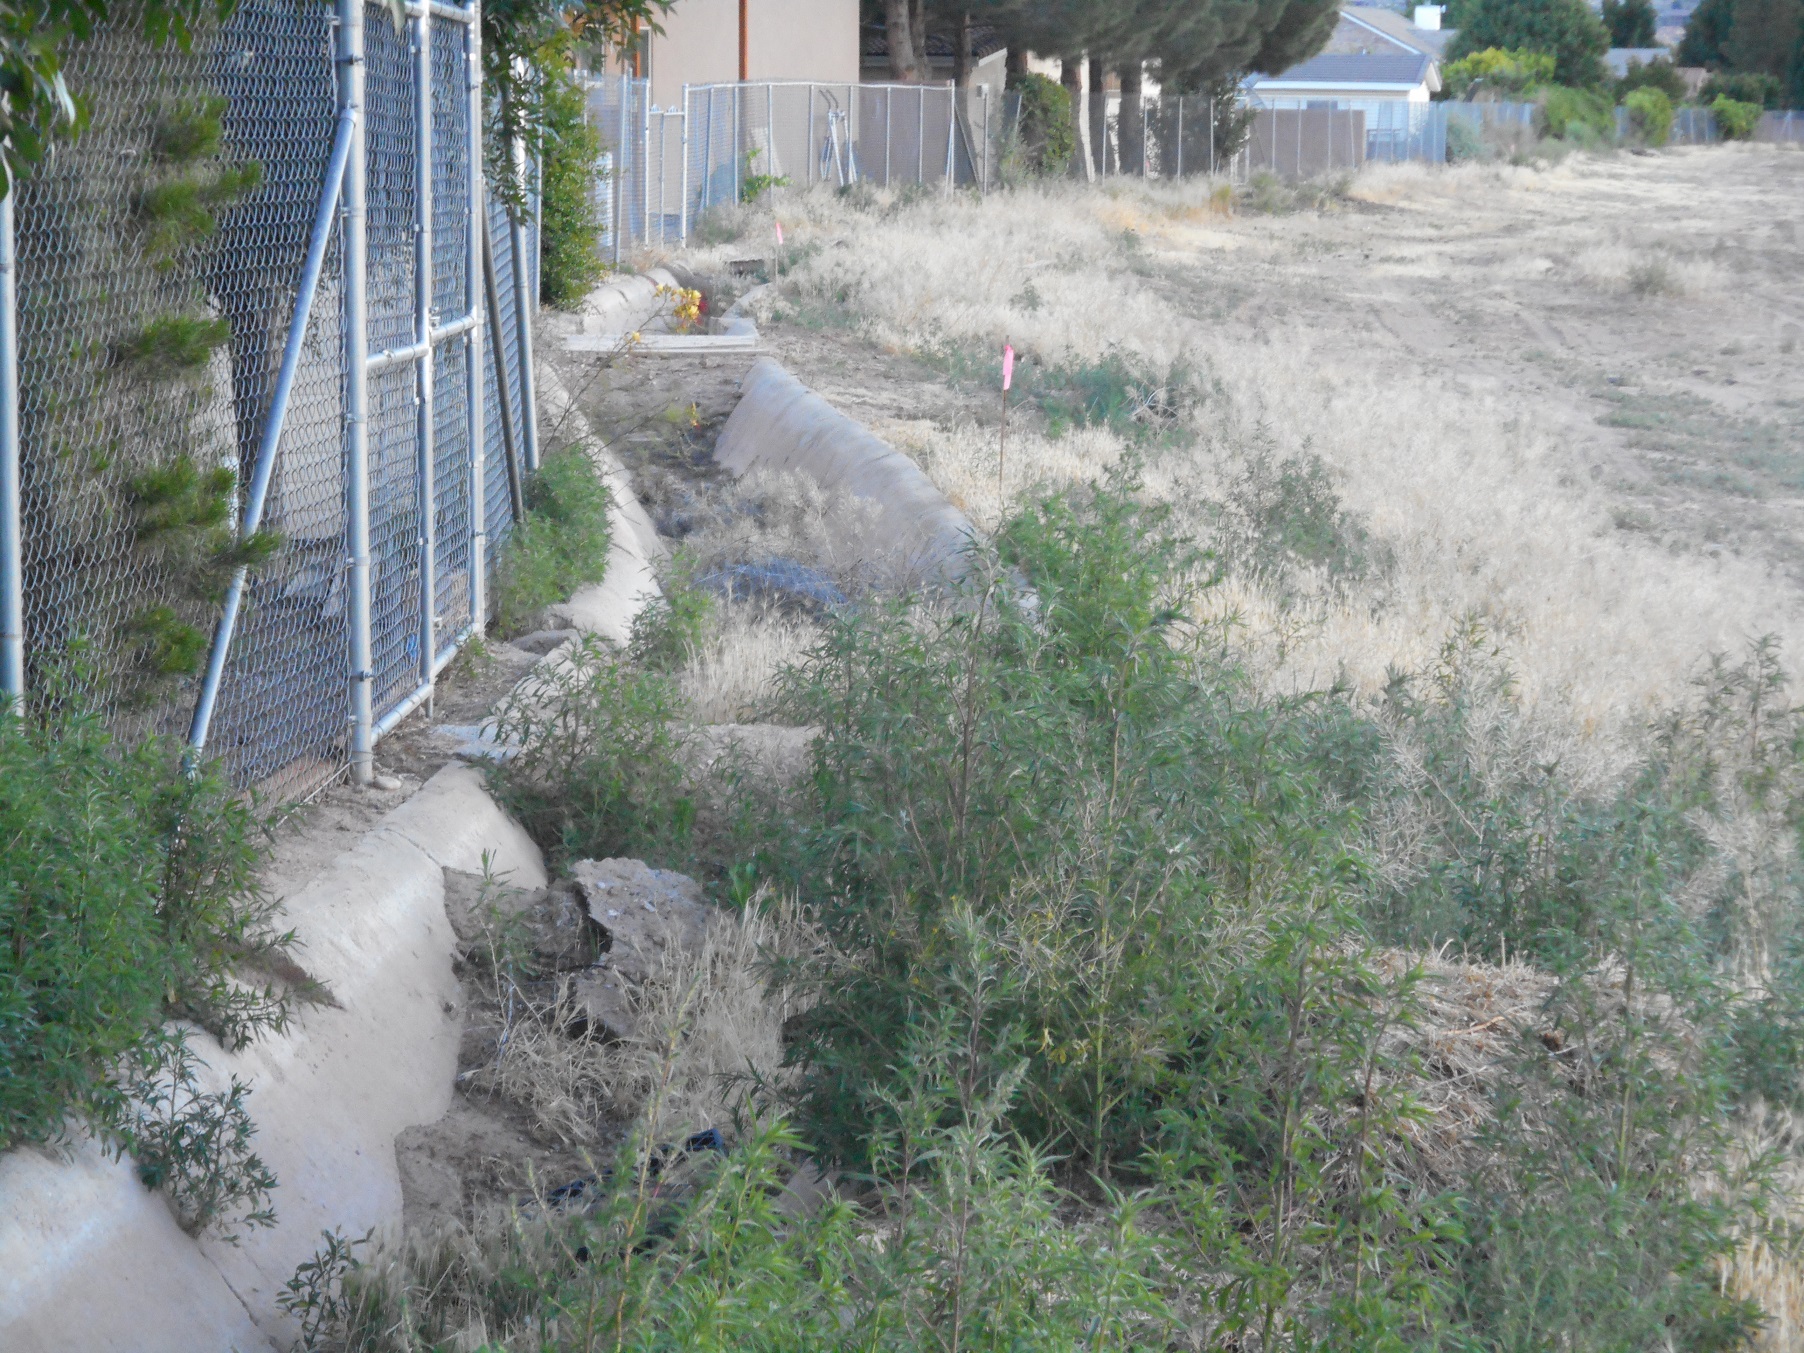 Cement lined ditch on the edge of the Foster Farm property